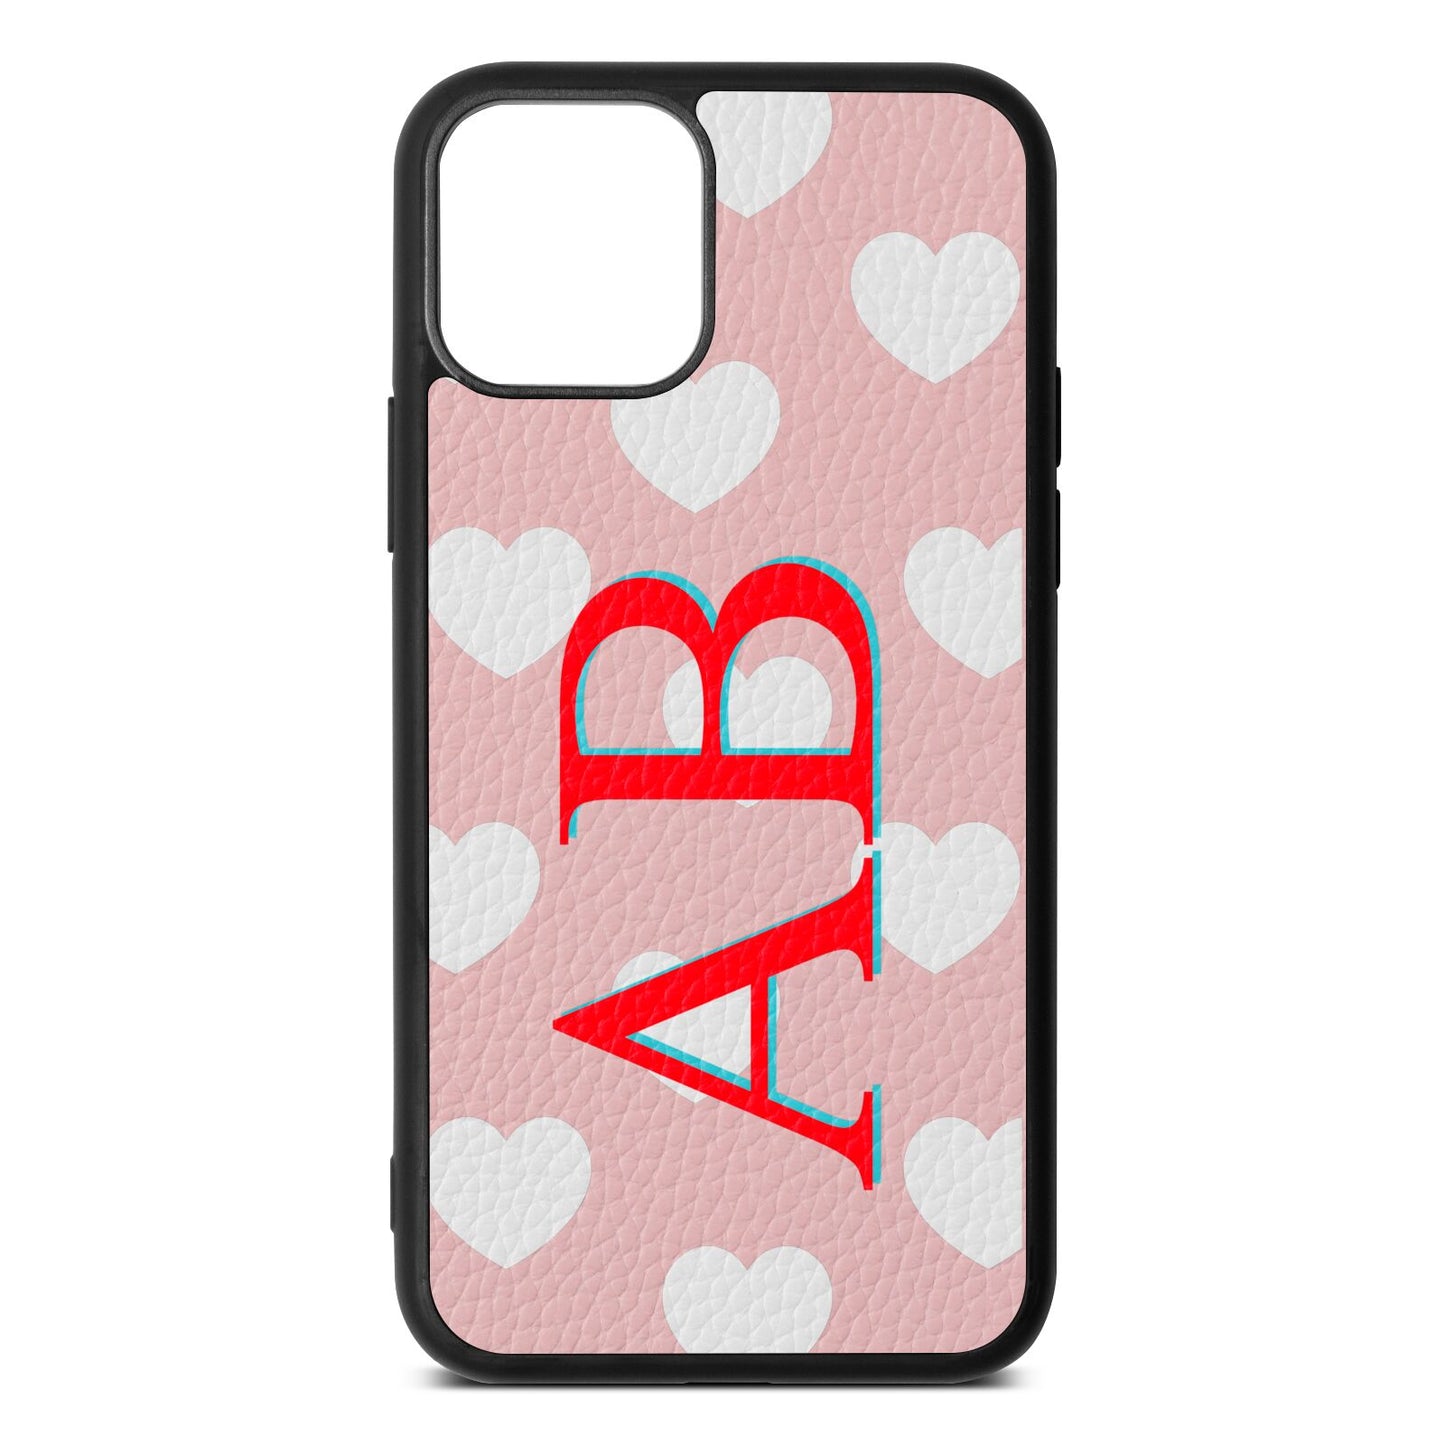 Heart Print Initials Pink Pebble Leather iPhone 11 Pro Case